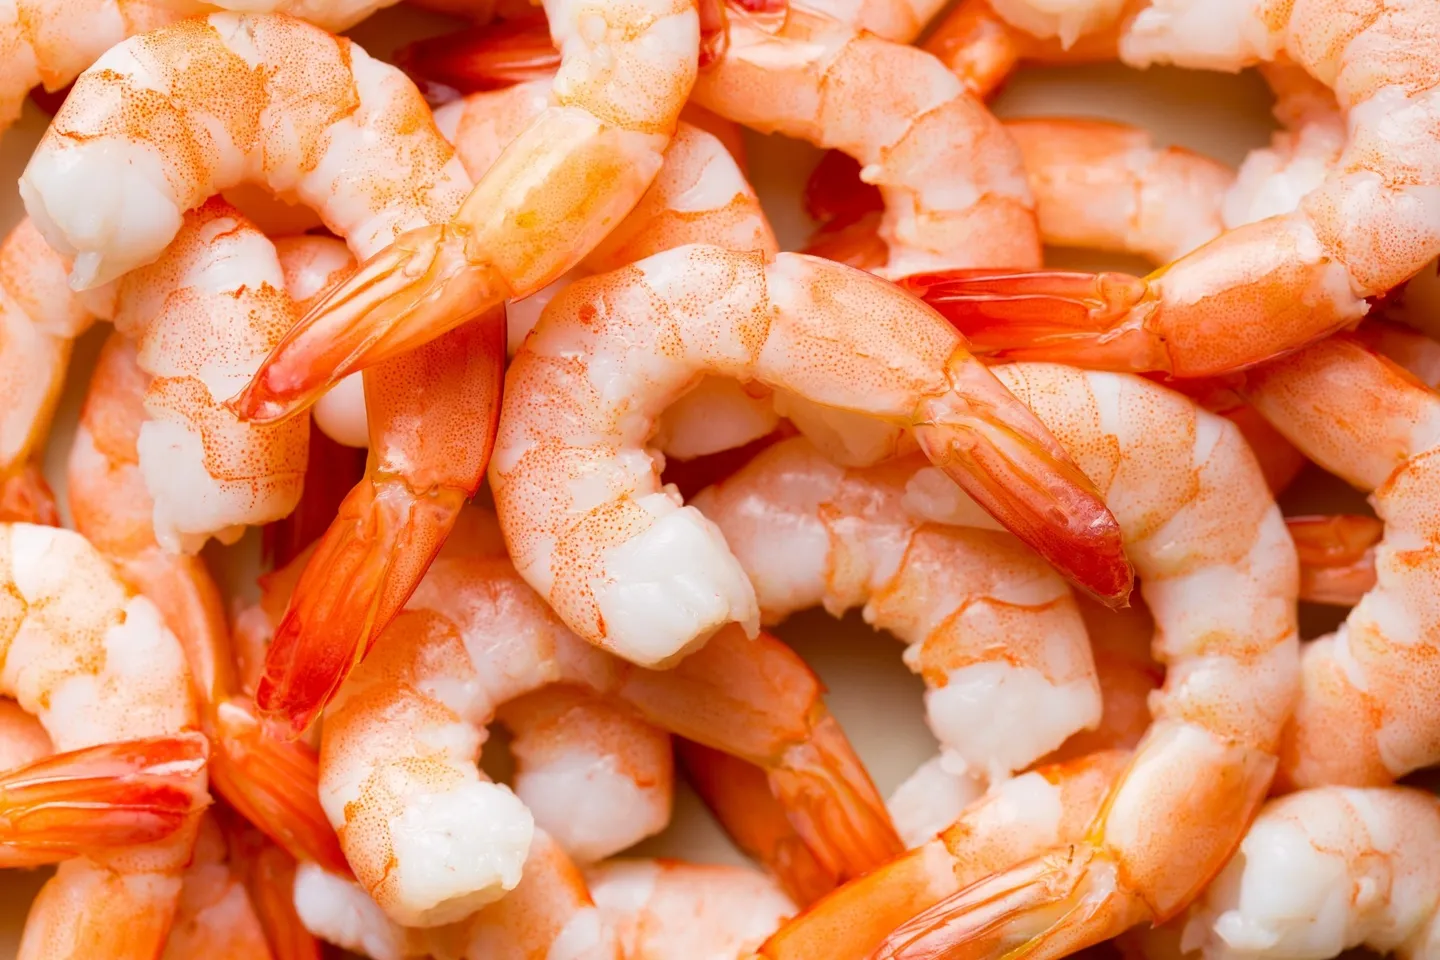 A close up of shrimp in the middle of a pile